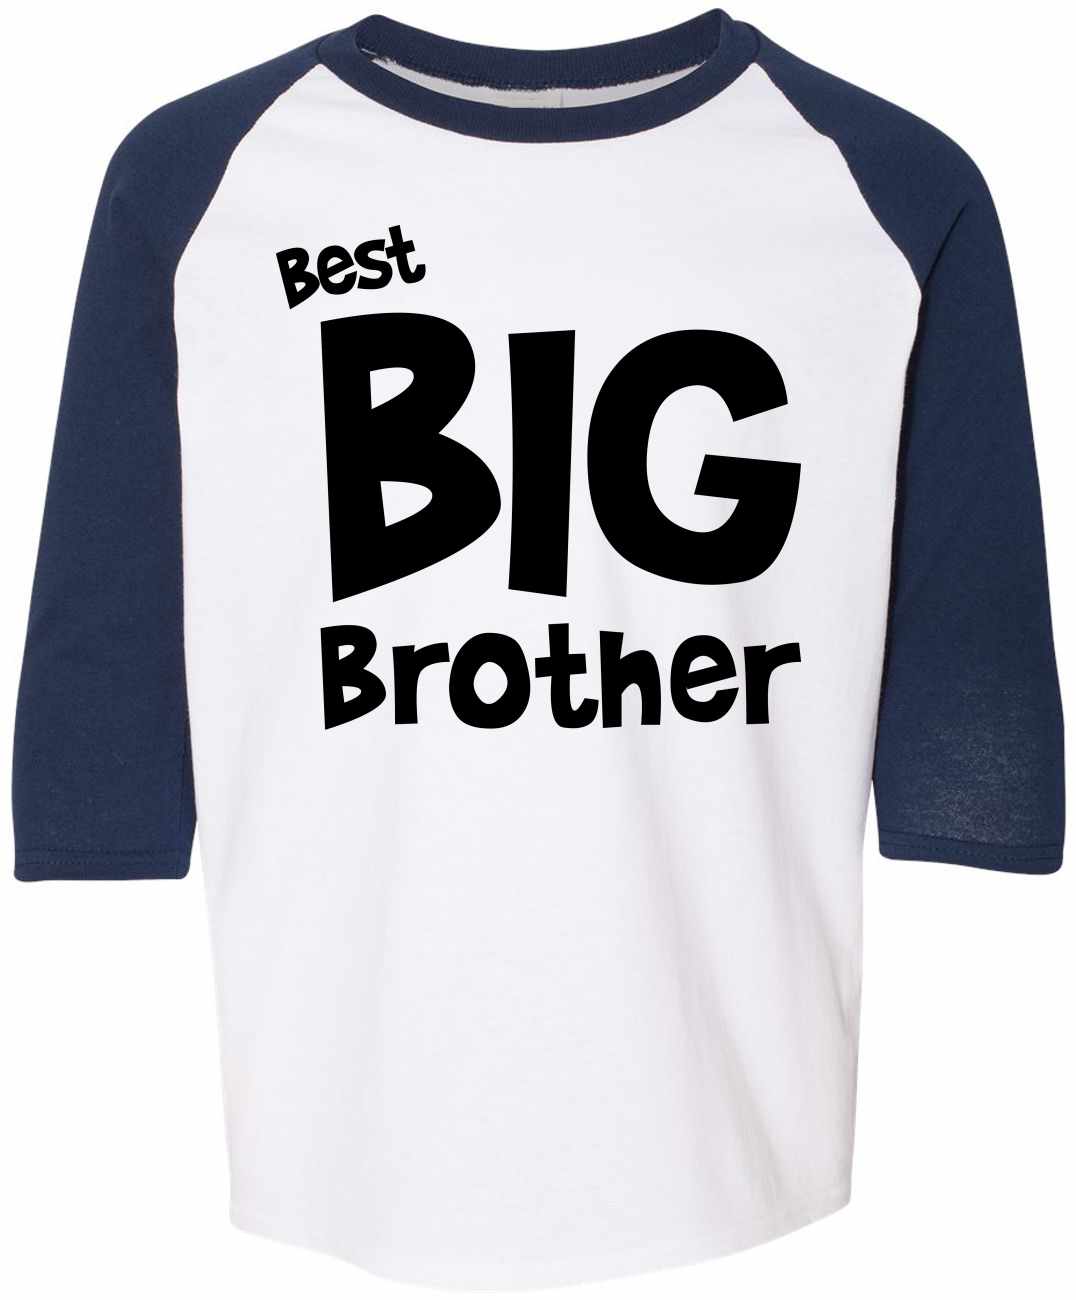 Best Big Brother on Youth Baseball Shirt (#1138-212)